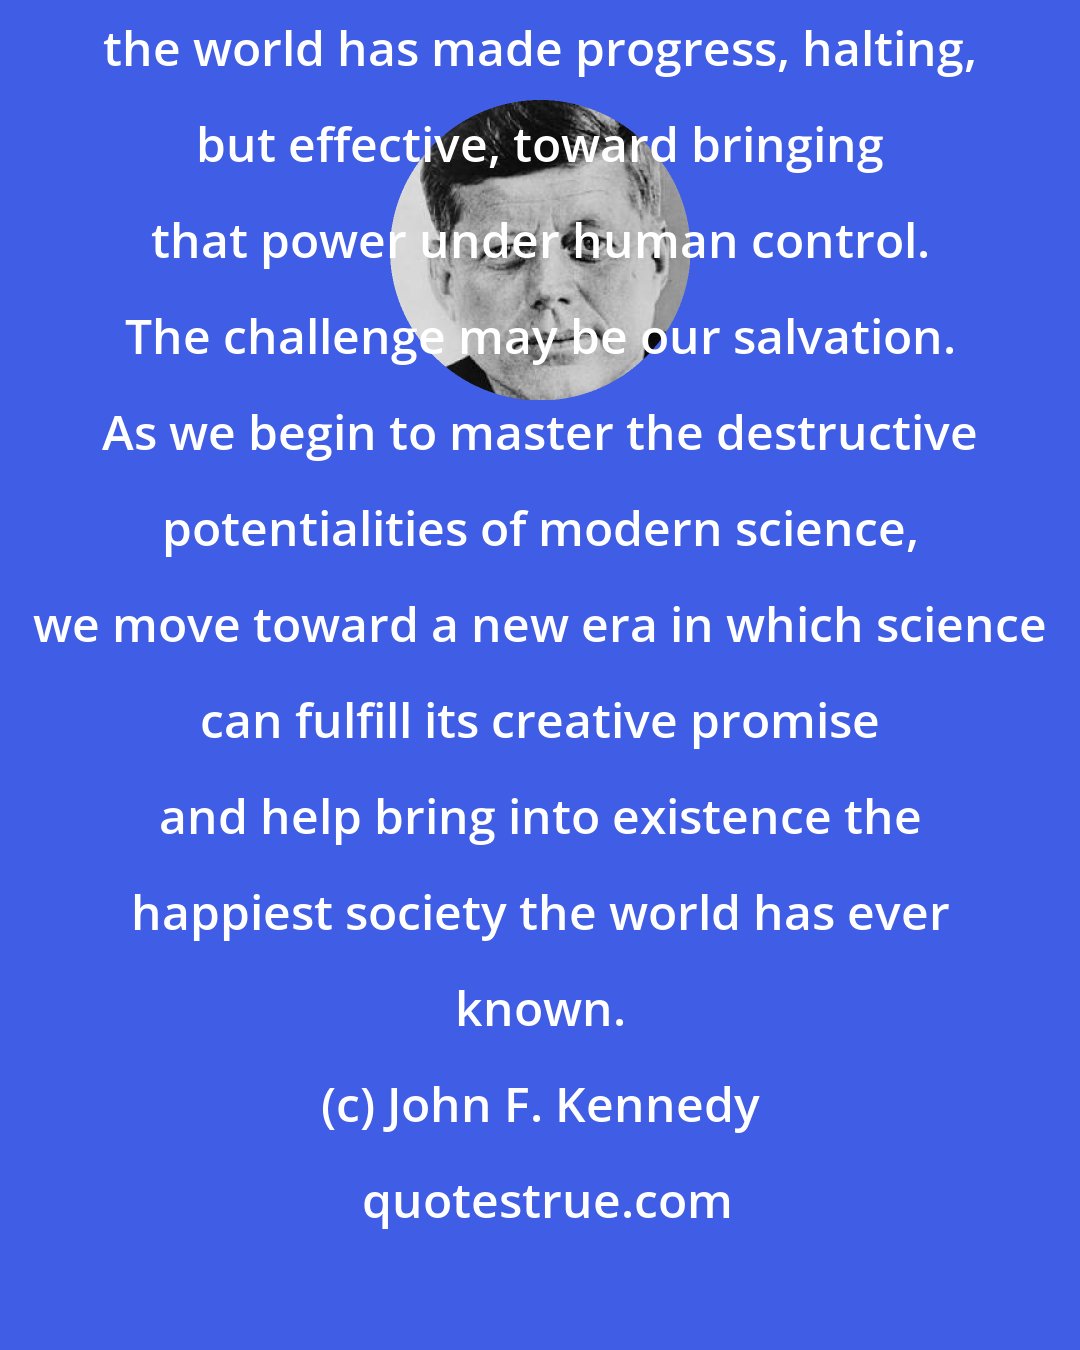 John F. Kennedy: In the years since man unlocked the power stored up within the atom, the world has made progress, halting, but effective, toward bringing that power under human control. The challenge may be our salvation. As we begin to master the destructive potentialities of modern science, we move toward a new era in which science can fulfill its creative promise and help bring into existence the happiest society the world has ever known.